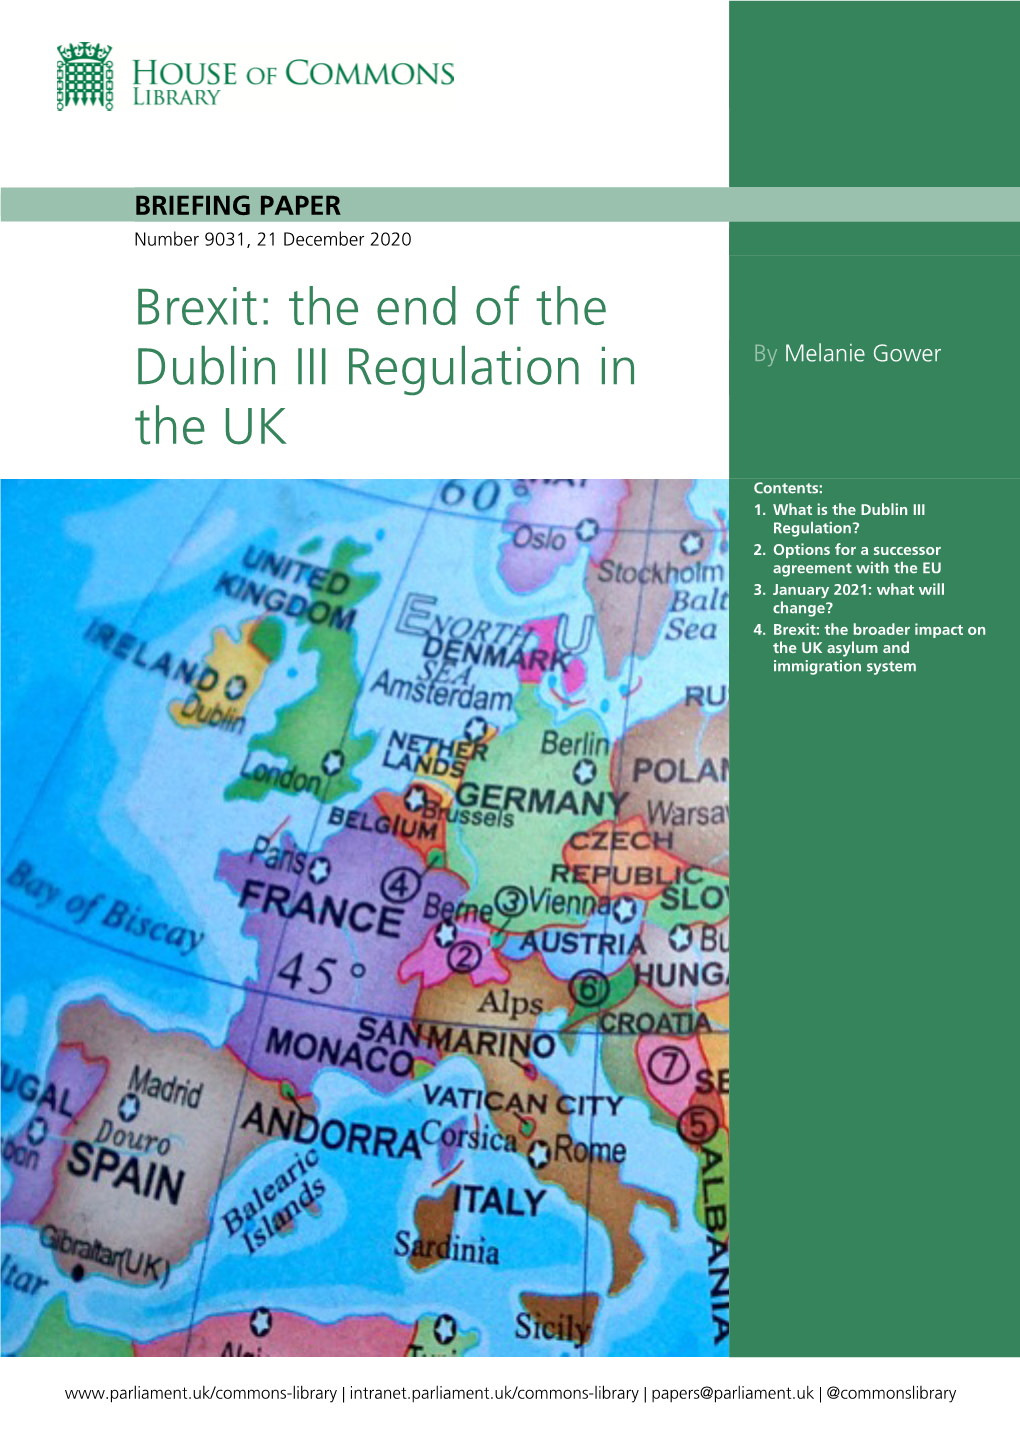 Brexit: the End of the Dublin III Regulation in the UK